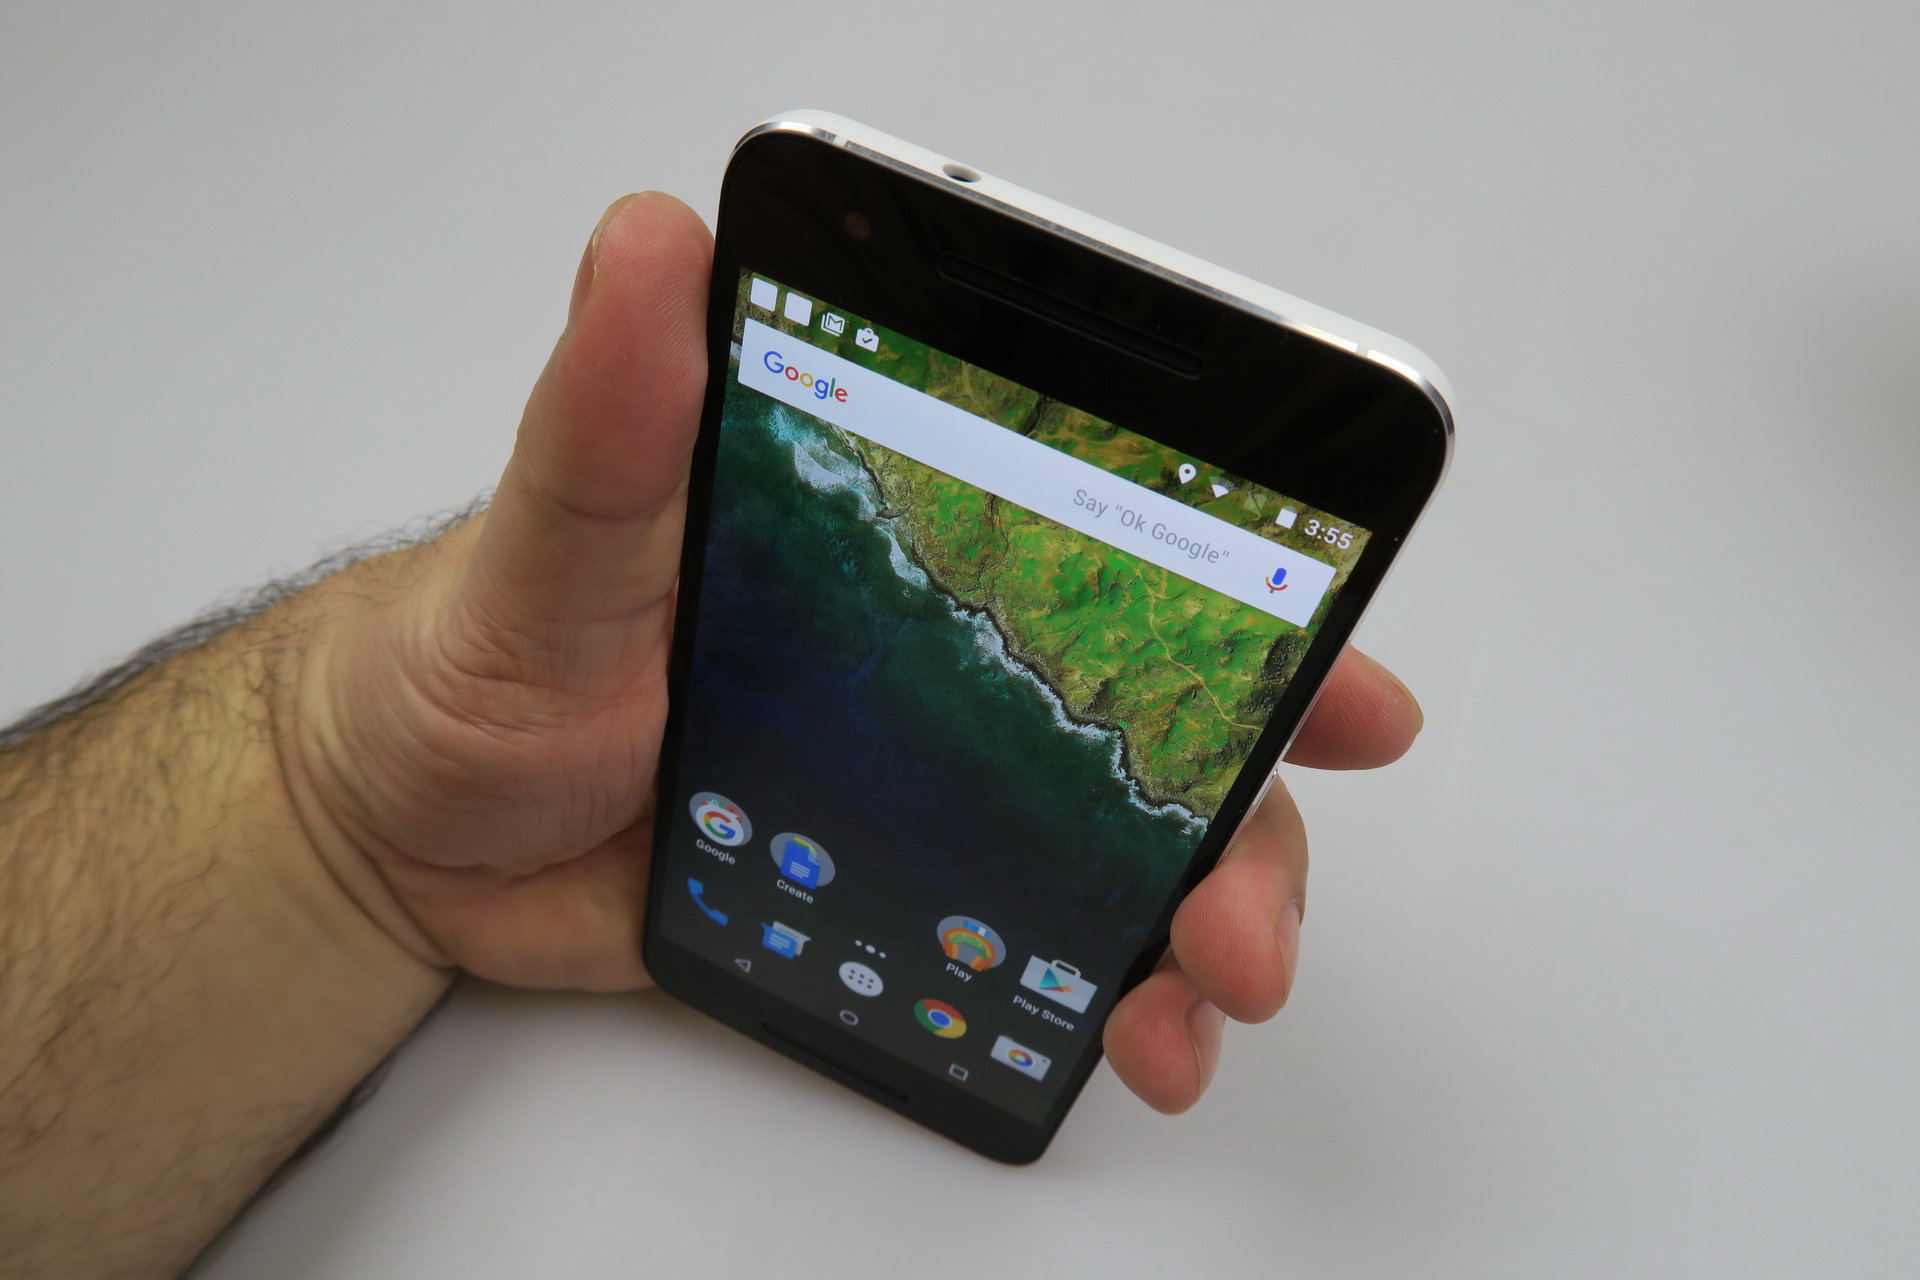 Huawei Nexus 6P Unboxing: Android 6.0 Marshmallow Flagship Gets Unboxed ...